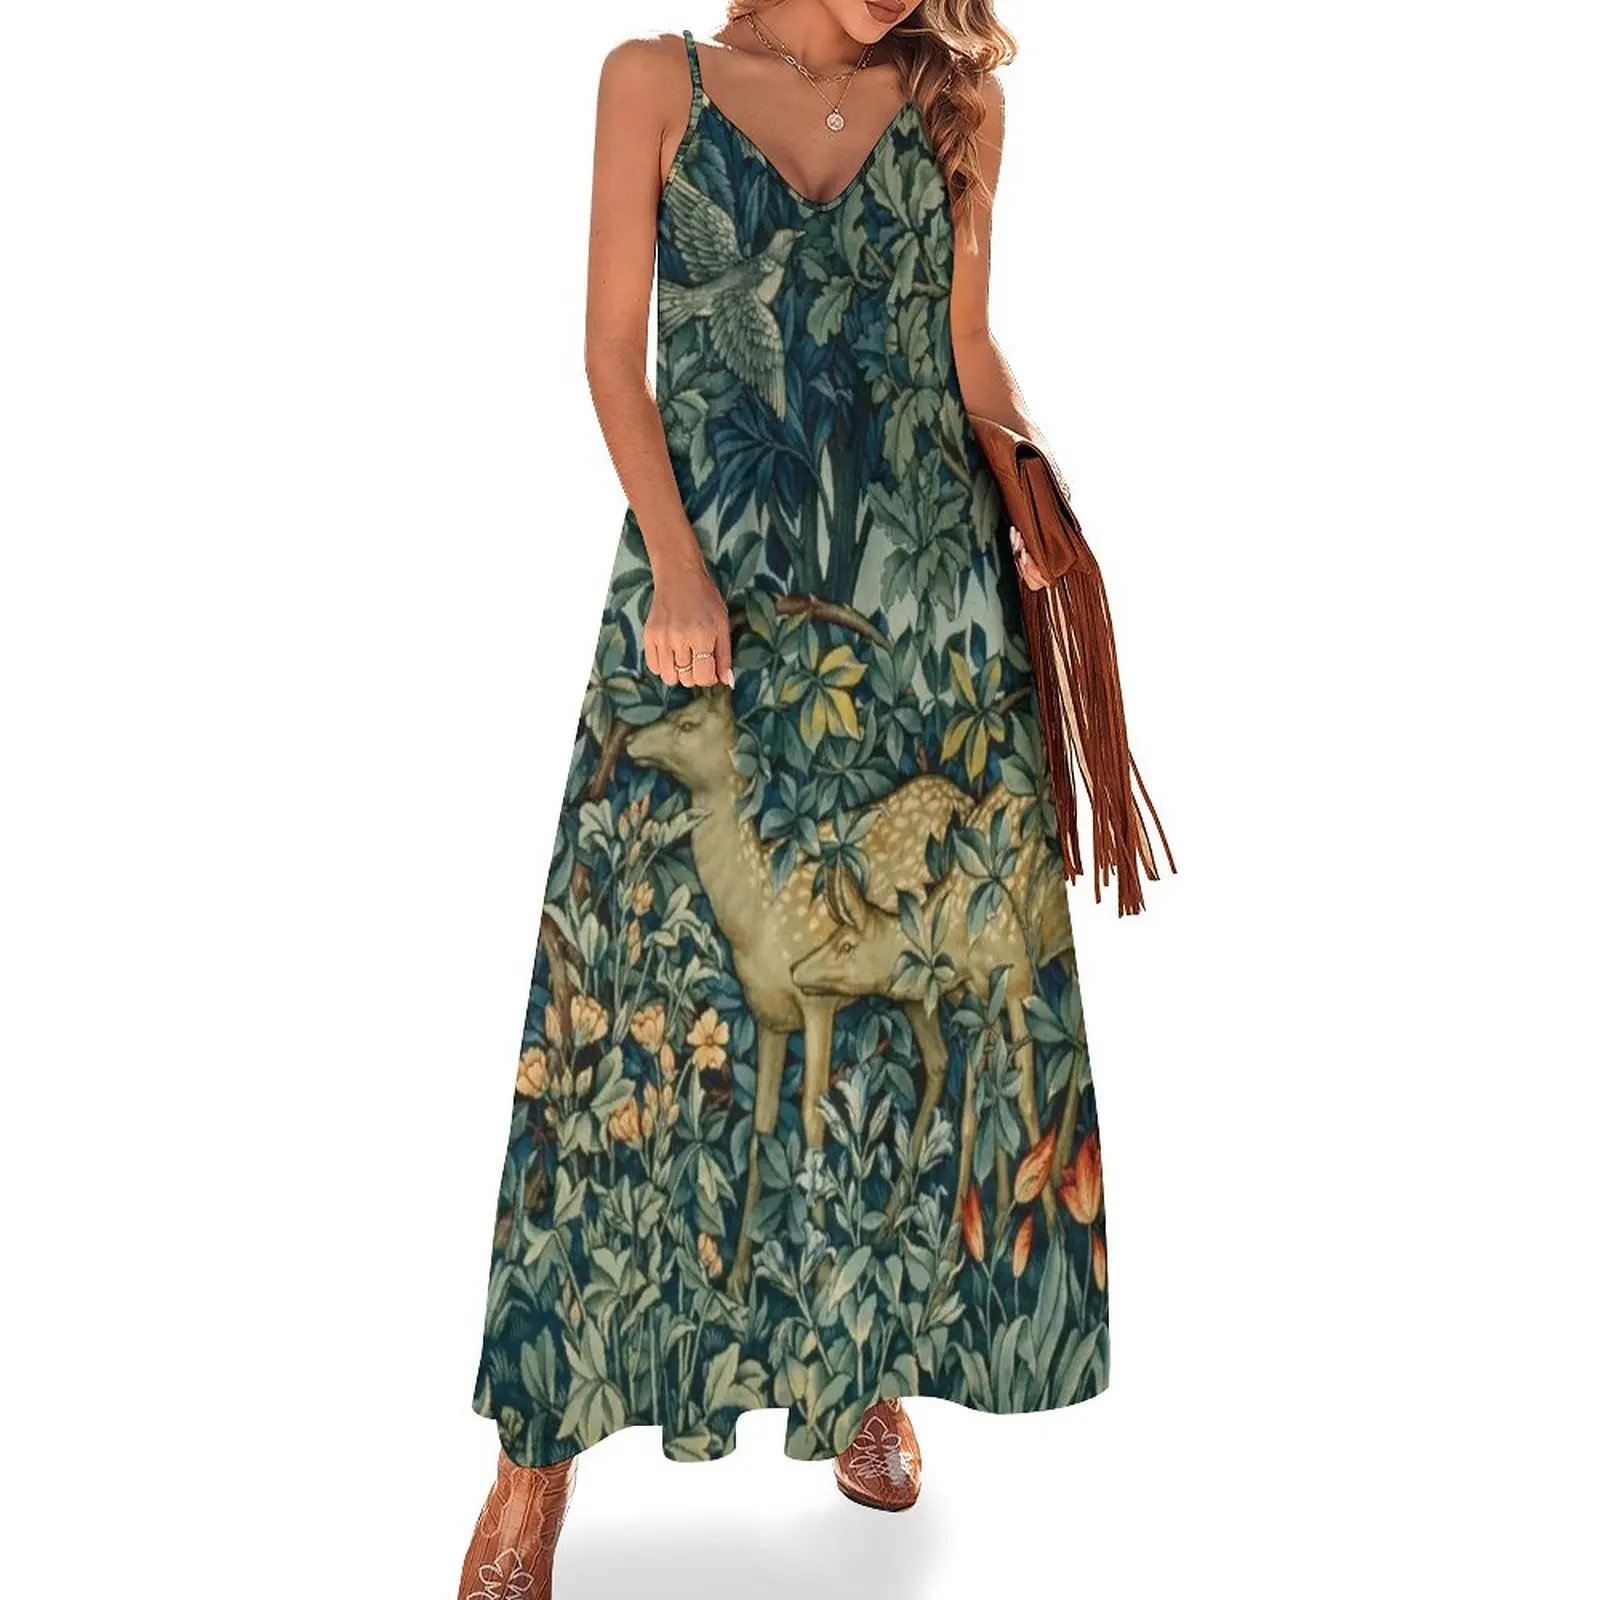 

GREENERY,TWO DOES AND BIRDS IN FOREST BlueGreen Floral Tapestry Sleeveless Dress dress party night dress dresses